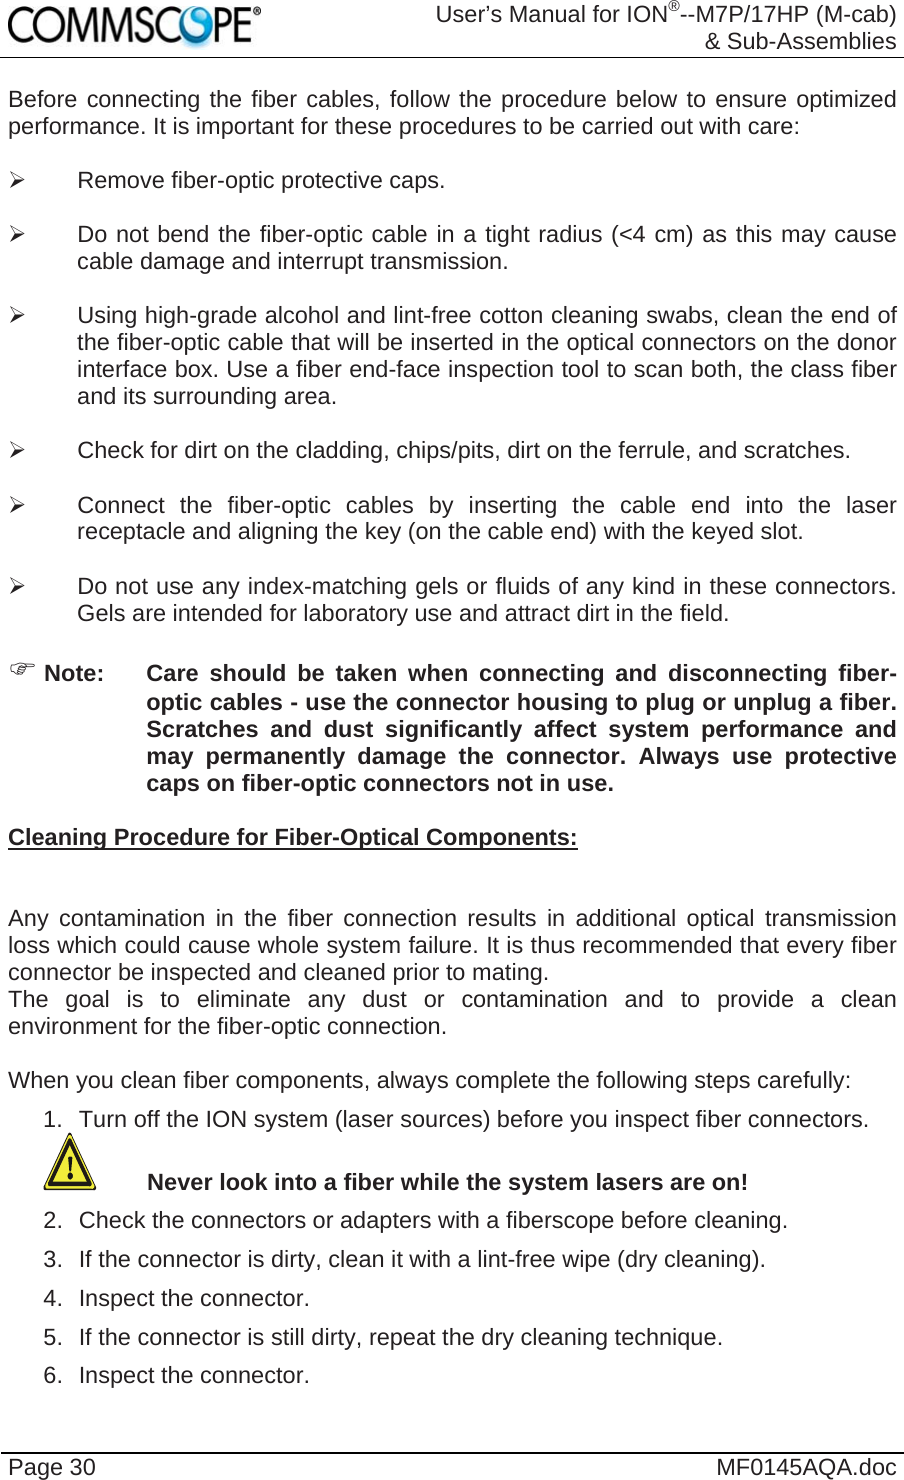  User’s Manual for ION®--M7P/17HP (M-cab) &amp; Sub-Assemblies Page 30  MF0145AQA.doc Before connecting the fiber cables, follow the procedure below to ensure optimized performance. It is important for these procedures to be carried out with care:    Remove fiber-optic protective caps.    Do not bend the fiber-optic cable in a tight radius (&lt;4 cm) as this may cause cable damage and interrupt transmission.    Using high-grade alcohol and lint-free cotton cleaning swabs, clean the end of the fiber-optic cable that will be inserted in the optical connectors on the donor interface box. Use a fiber end-face inspection tool to scan both, the class fiber and its surrounding area.     Check for dirt on the cladding, chips/pits, dirt on the ferrule, and scratches.    Connect the fiber-optic cables by inserting the cable end into the laser receptacle and aligning the key (on the cable end) with the keyed slot.    Do not use any index-matching gels or fluids of any kind in these connectors. Gels are intended for laboratory use and attract dirt in the field.   Note:  Care should be taken when connecting and disconnecting fiber-optic cables - use the connector housing to plug or unplug a fiber. Scratches and dust significantly affect system performance and may permanently damage the connector. Always use protective caps on fiber-optic connectors not in use.  Cleaning Procedure for Fiber-Optical Components:   Any contamination in the fiber connection results in additional optical transmission loss which could cause whole system failure. It is thus recommended that every fiber connector be inspected and cleaned prior to mating. The goal is to eliminate any dust or contamination and to provide a clean environment for the fiber-optic connection.   When you clean fiber components, always complete the following steps carefully: 1.  Turn off the ION system (laser sources) before you inspect fiber connectors.  Never look into a fiber while the system lasers are on! 2.  Check the connectors or adapters with a fiberscope before cleaning. 3.  If the connector is dirty, clean it with a lint-free wipe (dry cleaning). 4. Inspect the connector. 5.  If the connector is still dirty, repeat the dry cleaning technique. 6. Inspect the connector. 